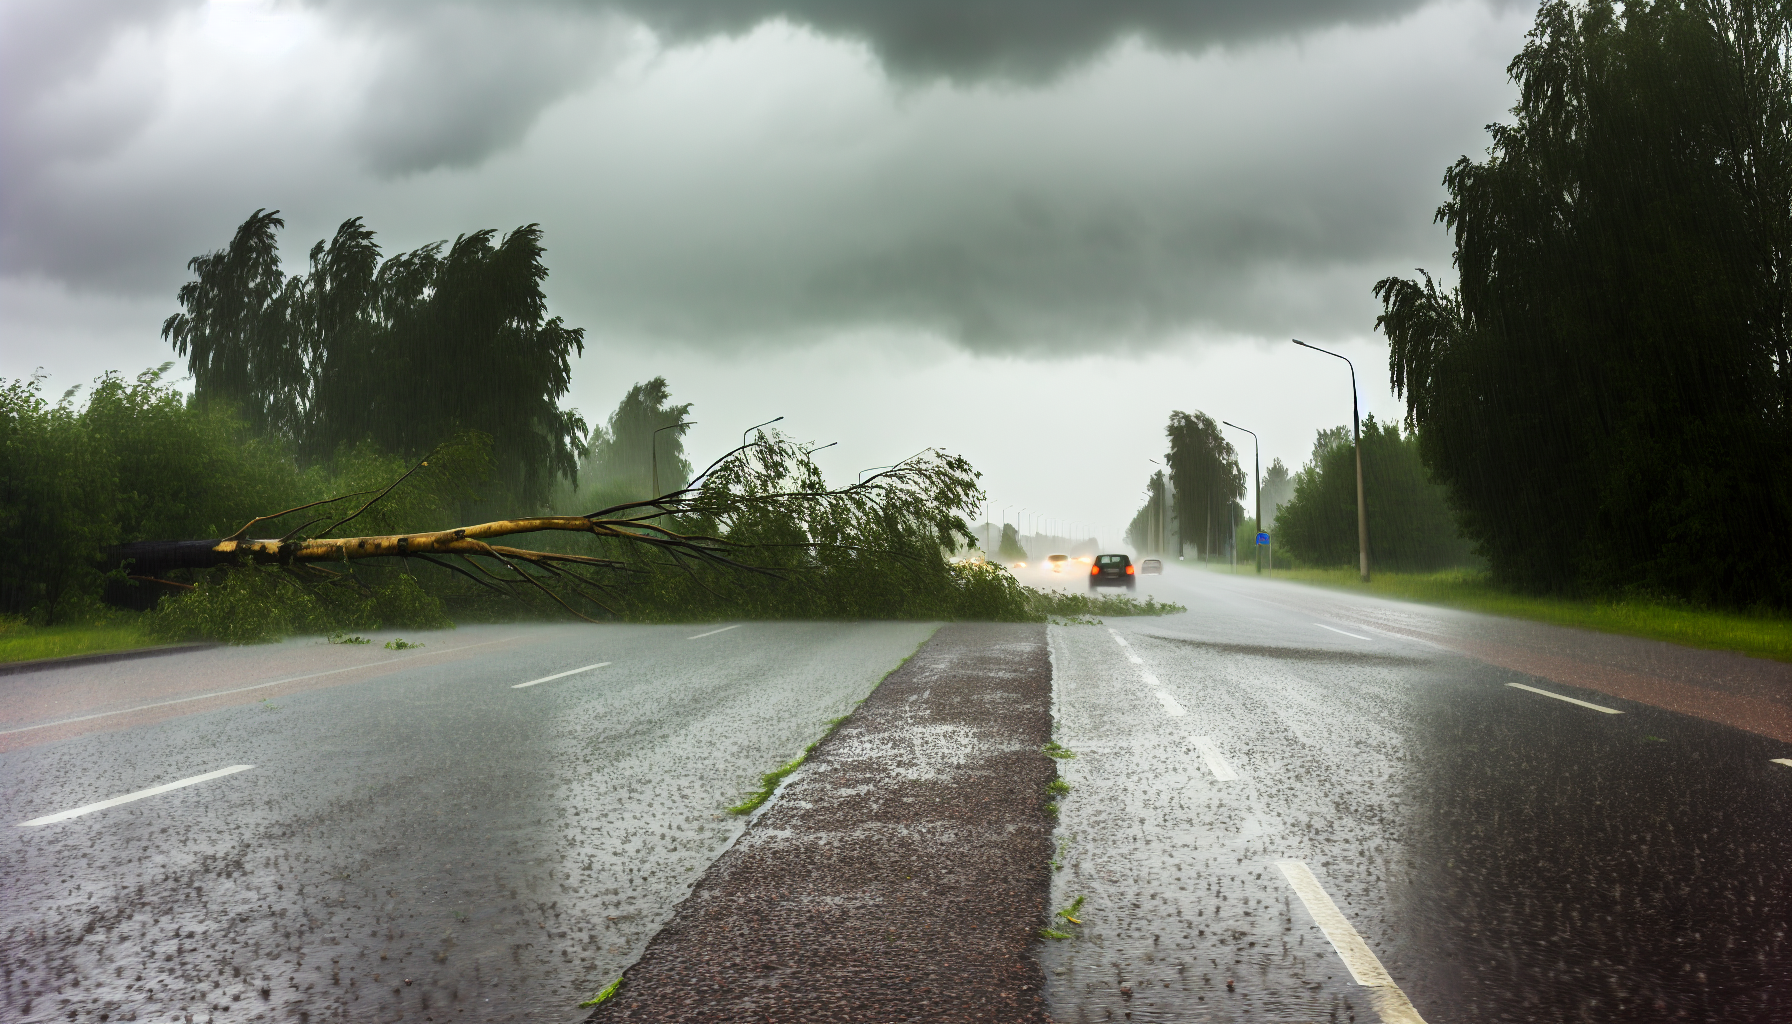 a downed tree on a rainy road